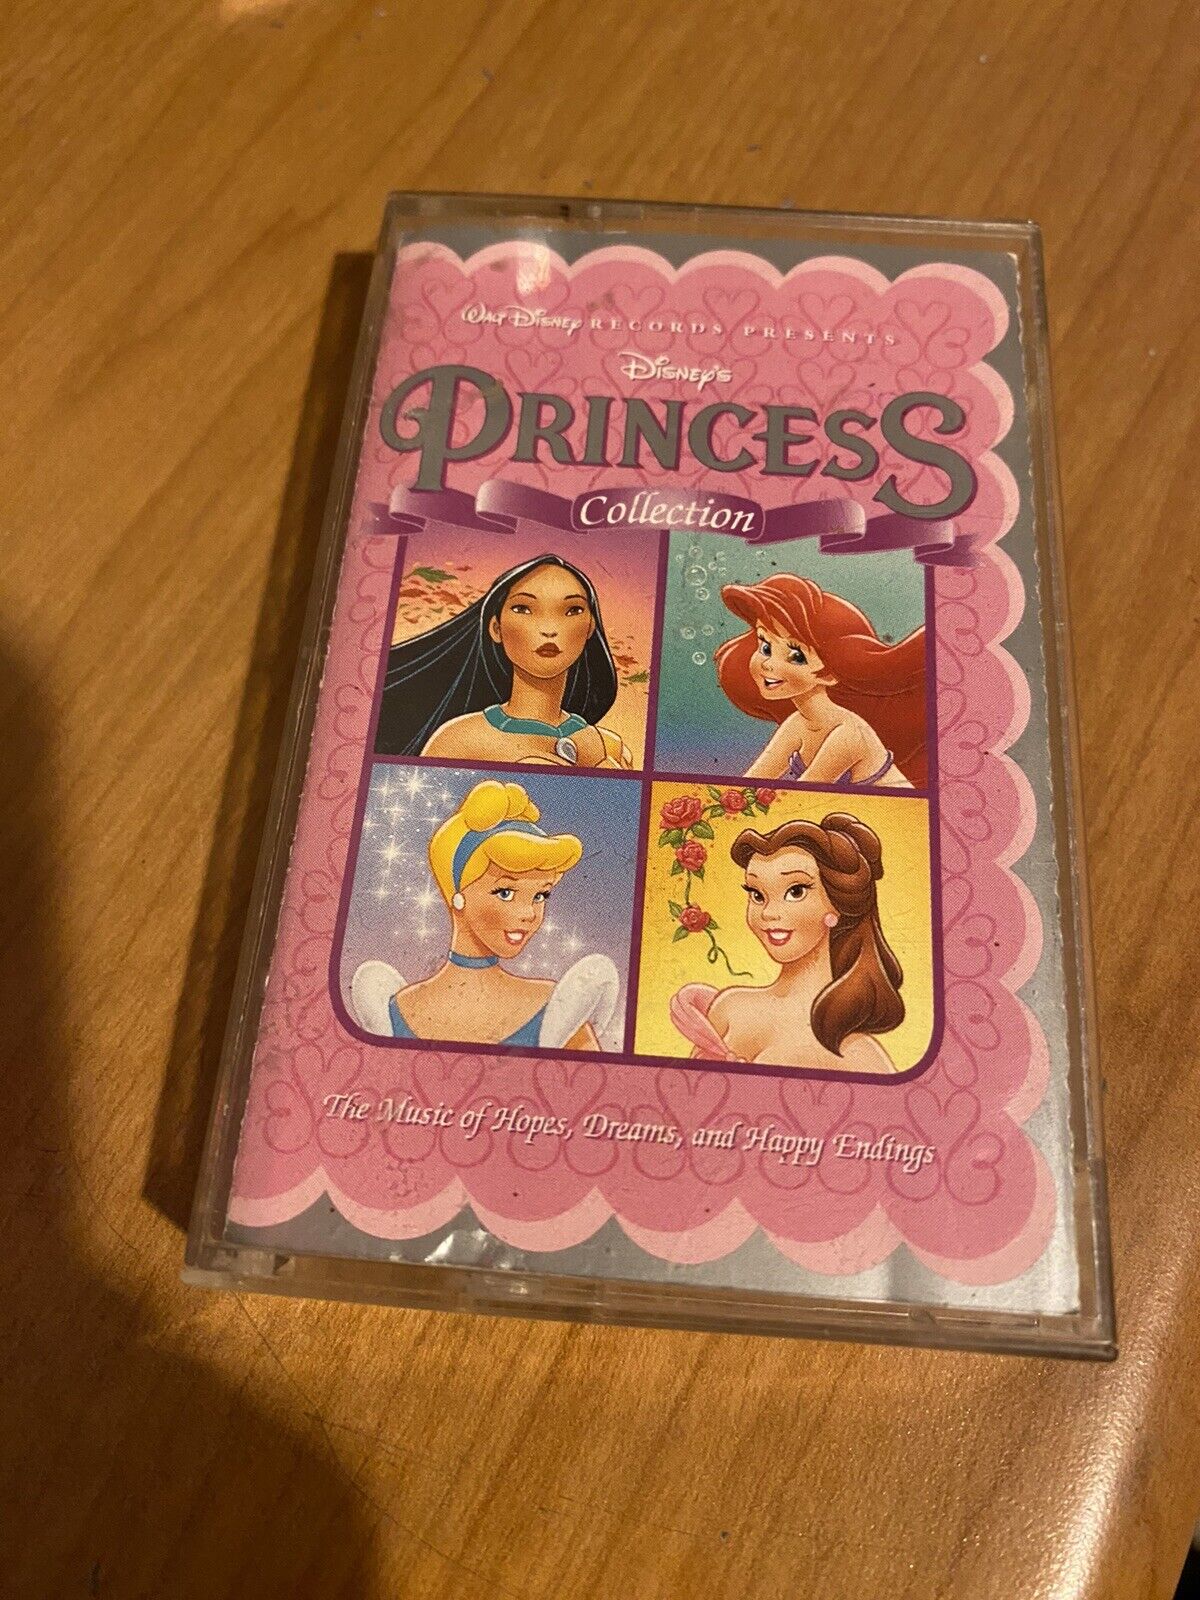 Disney Records Princess Collection Cassette Tape - Volume One - 1995 - Music